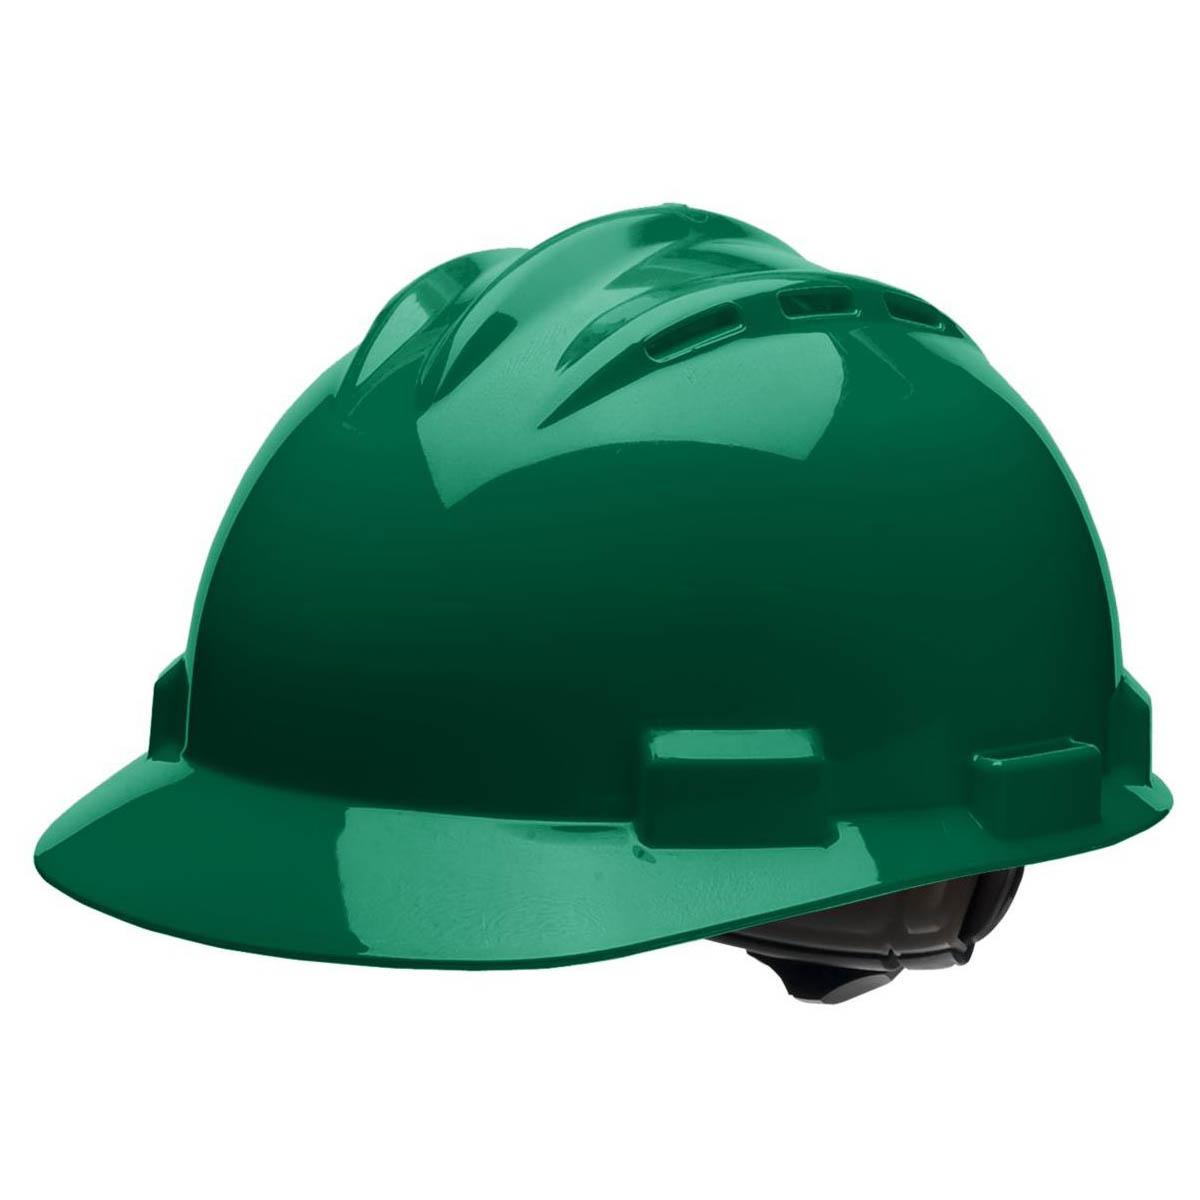 Bullard Standard Vented Cap Style Hard Hat from Columbia Safety